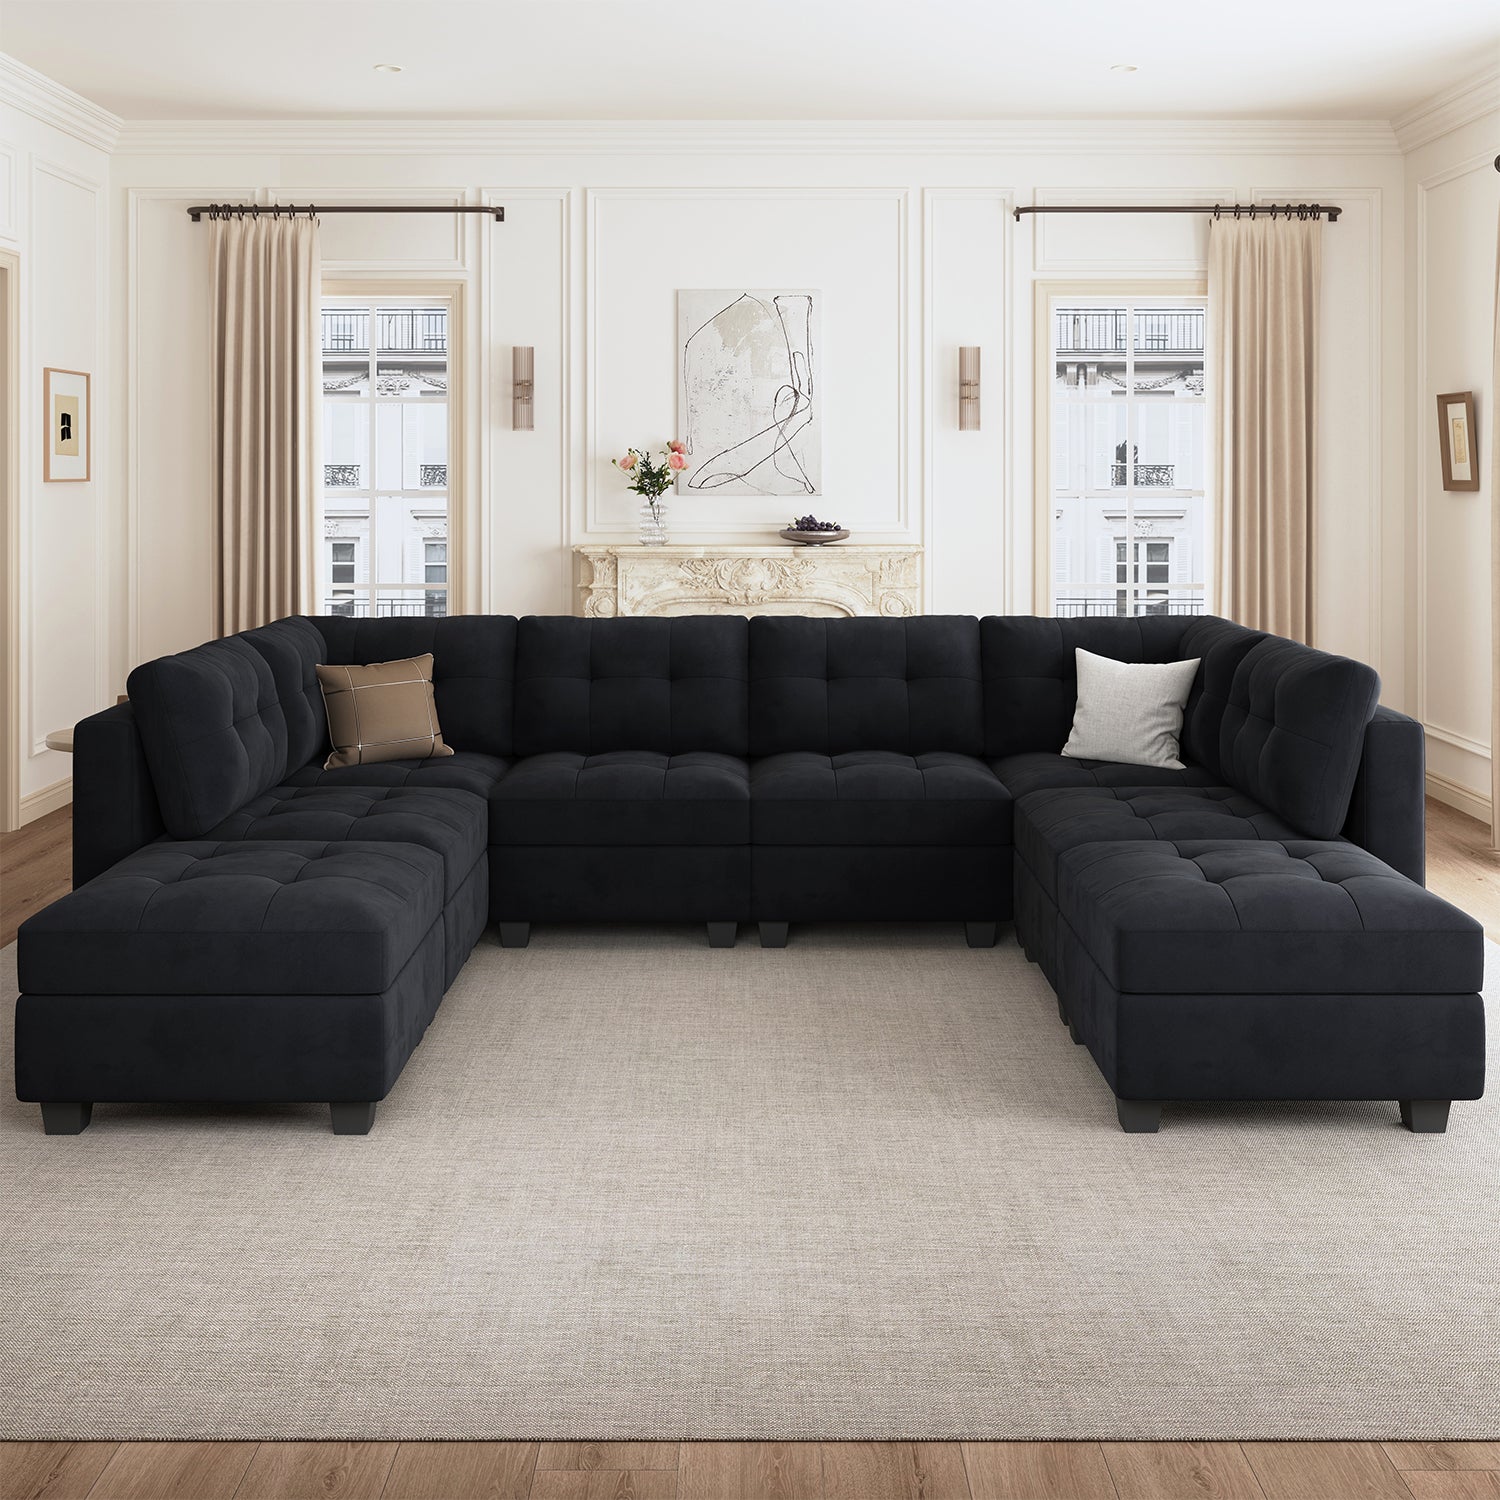 HONBAY 8-Piece Velvet Modular Sectional With Storage Seat